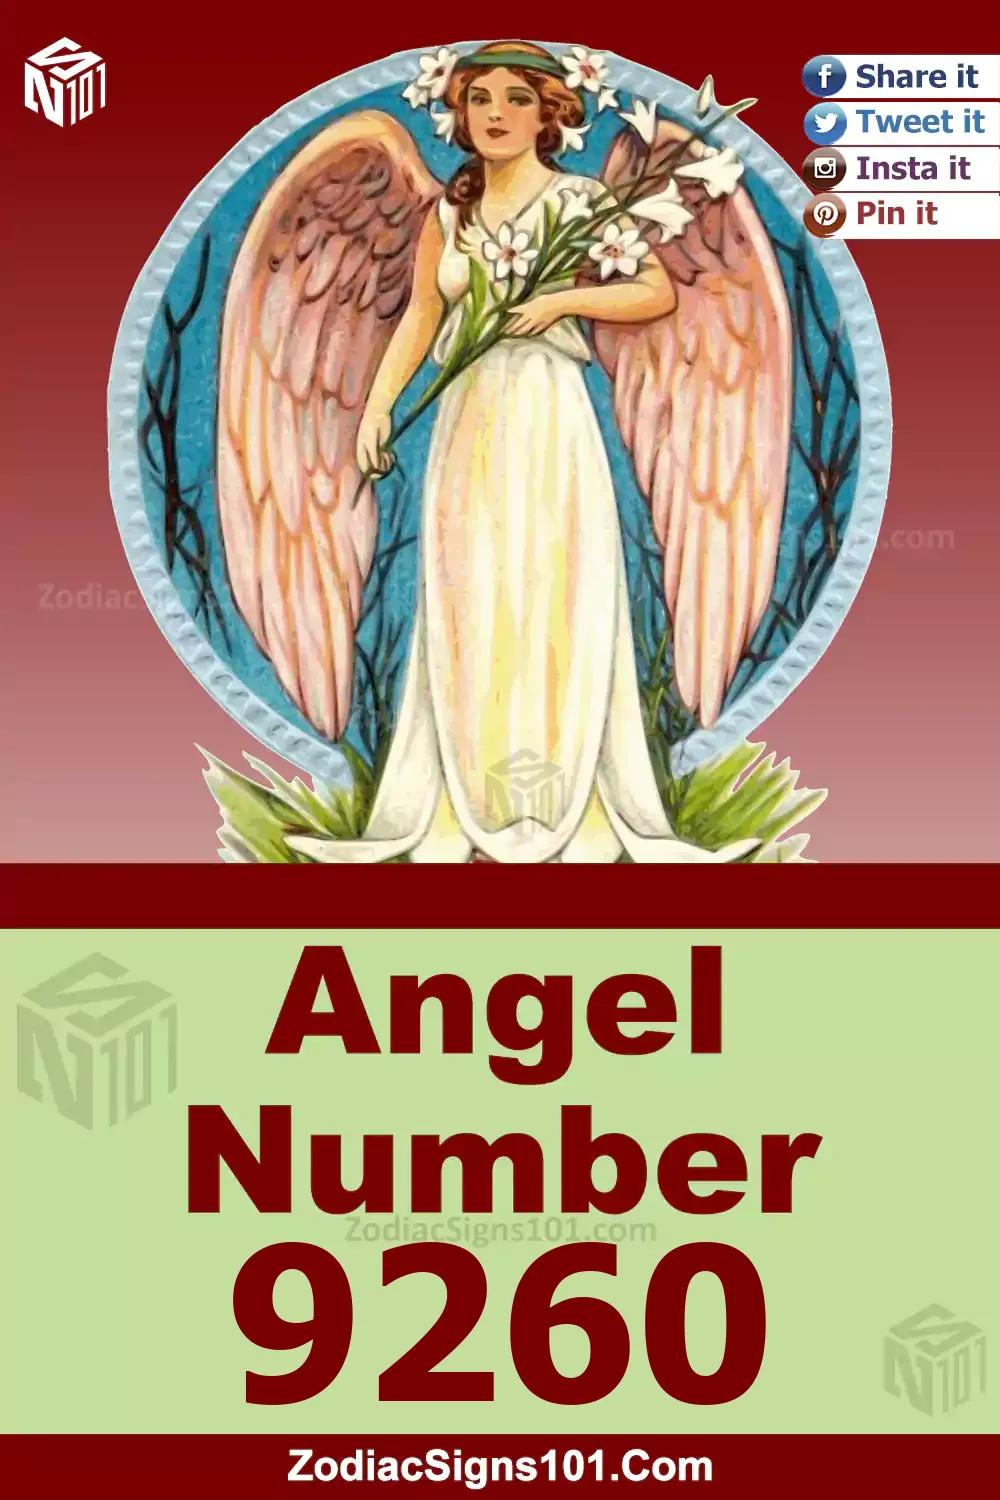 9260 Angel Number Meaning